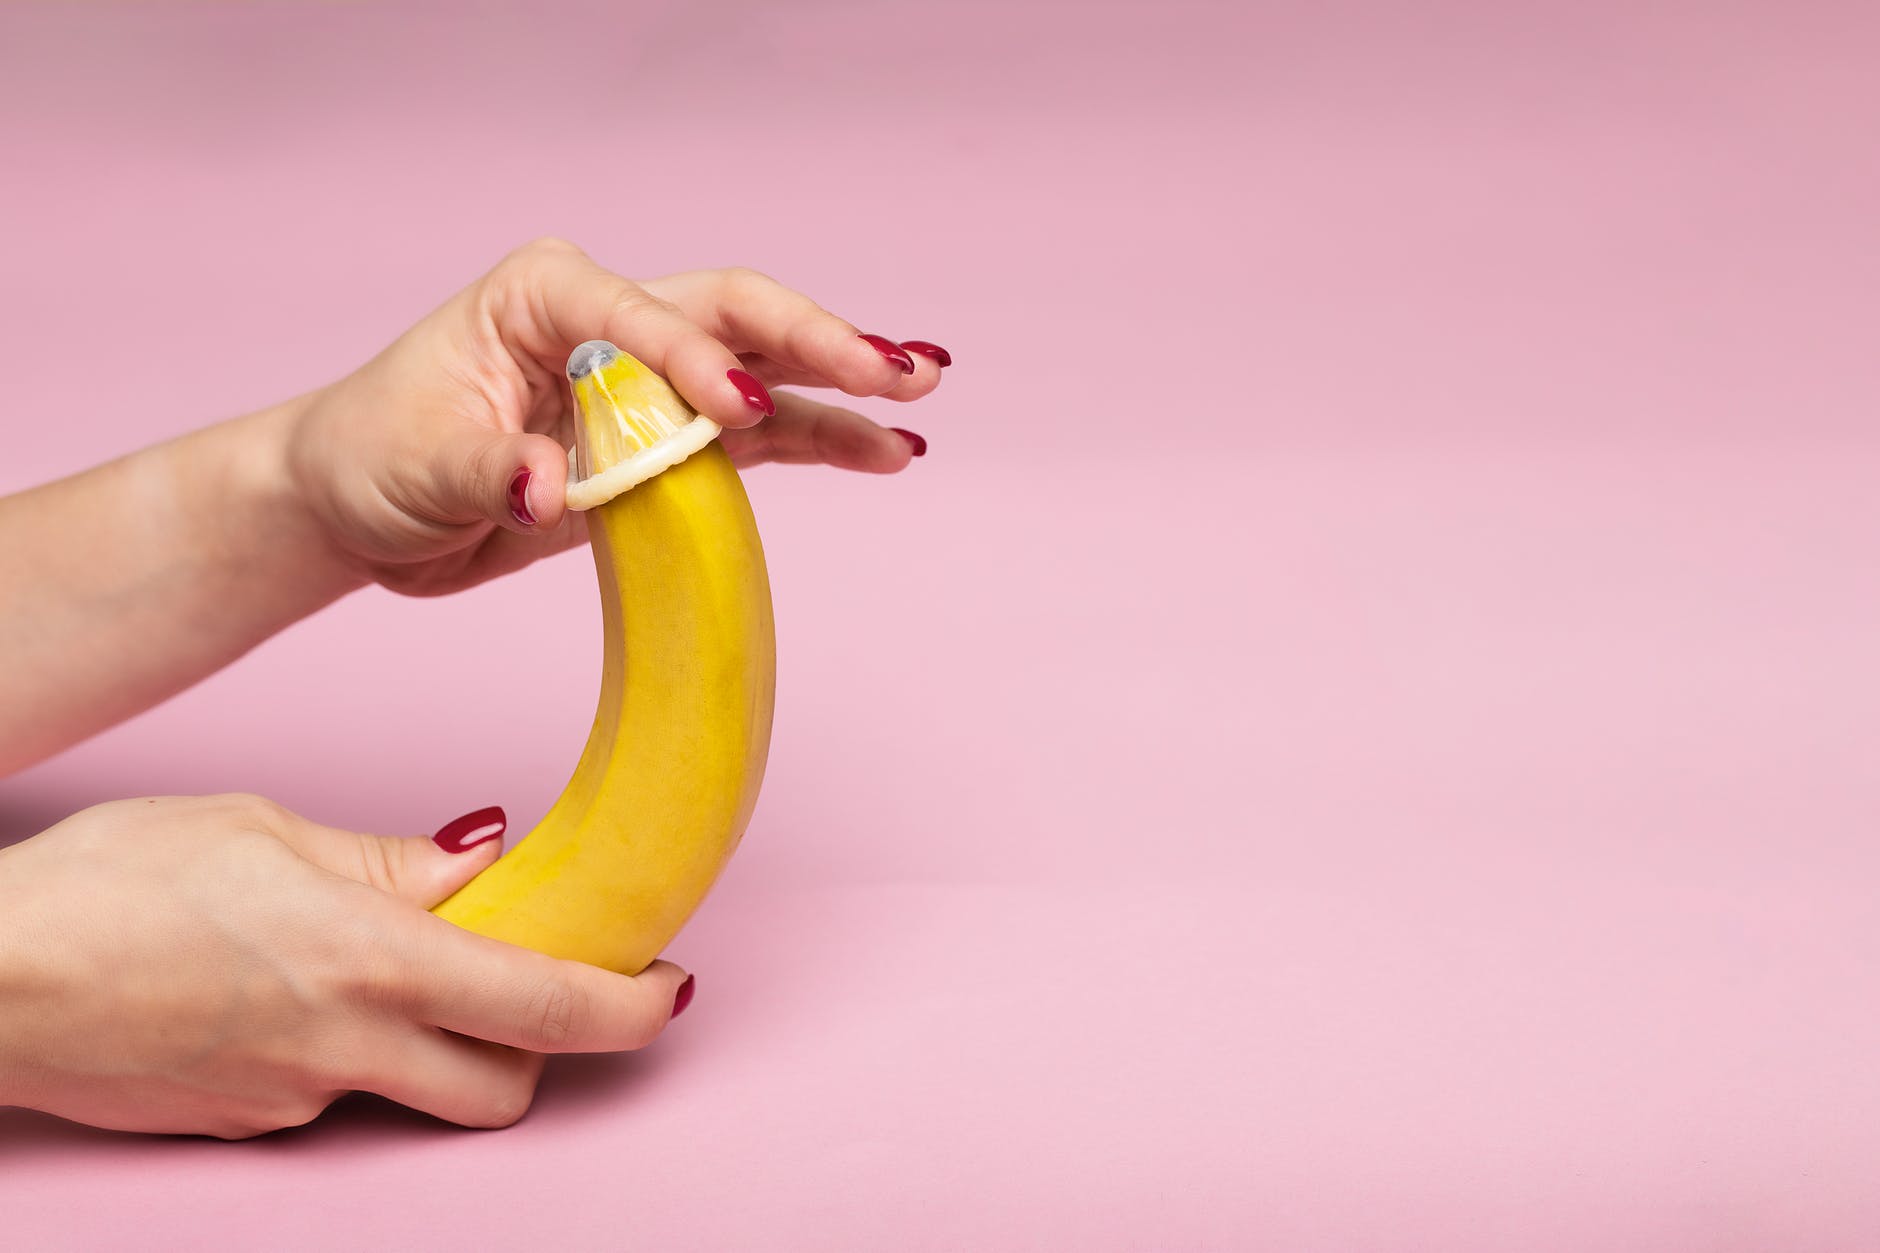 a person holding yellow banana fruit